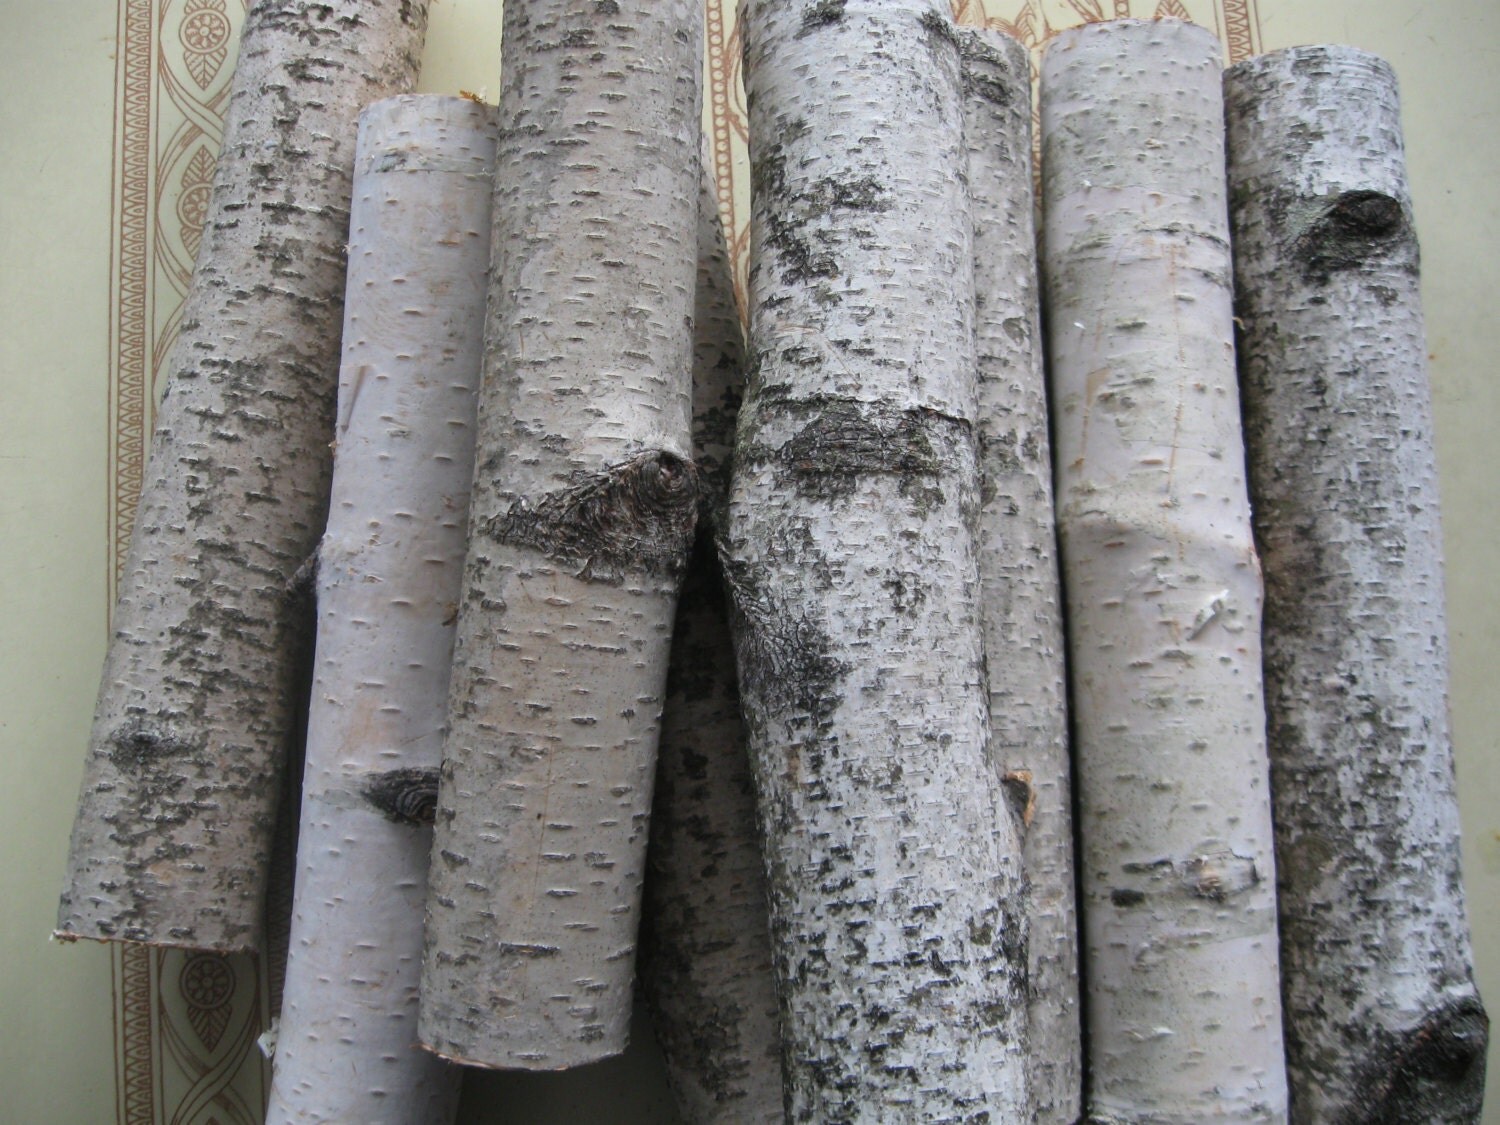 Native Maine White Birch Log Pieces for by oldandnewtiques on Etsy